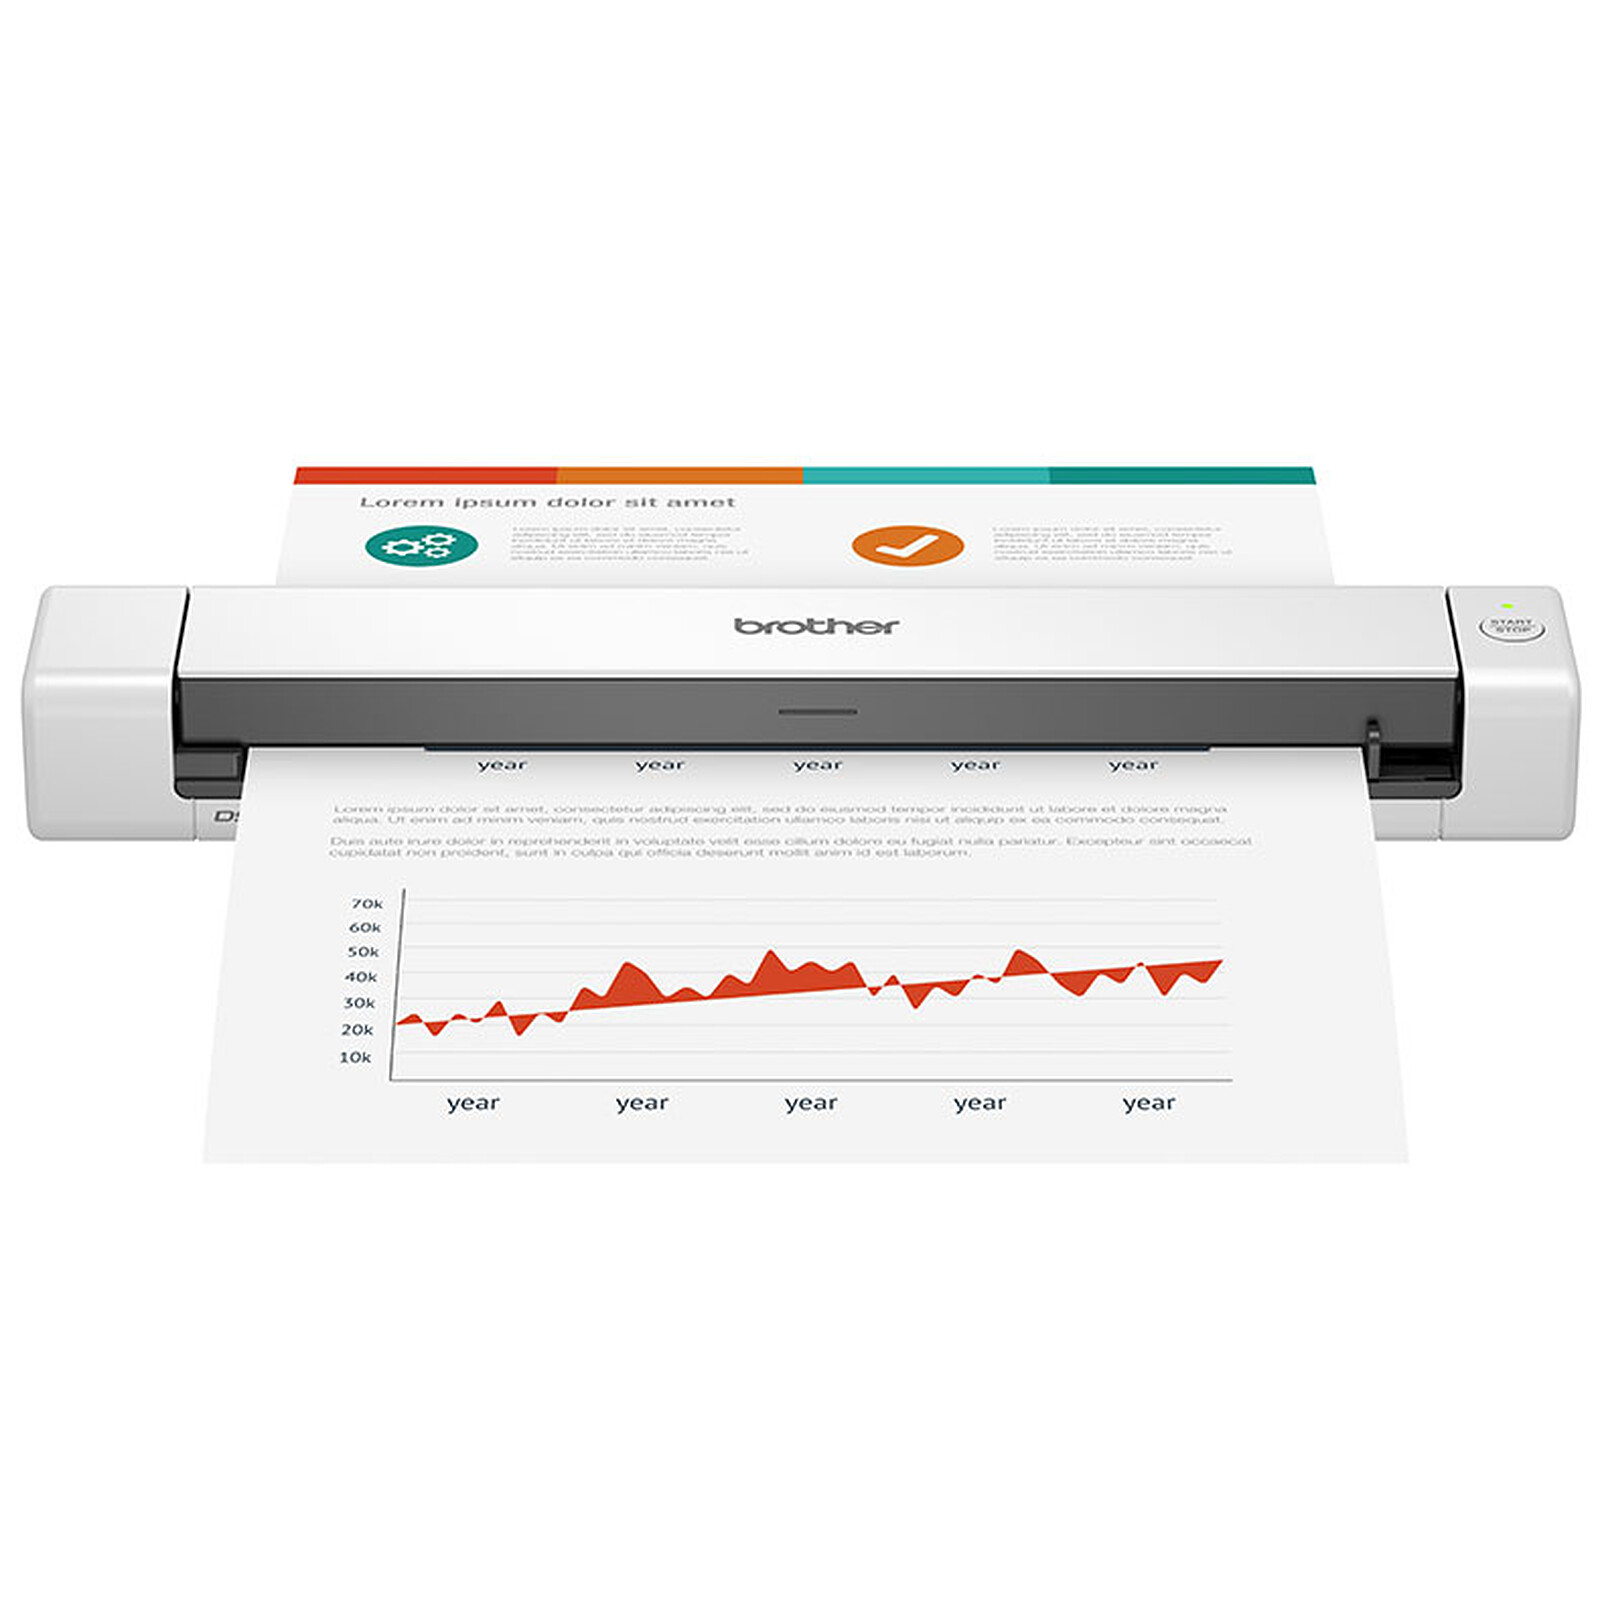 DS-940DW, Scanner Portable WiFi Recto Verso